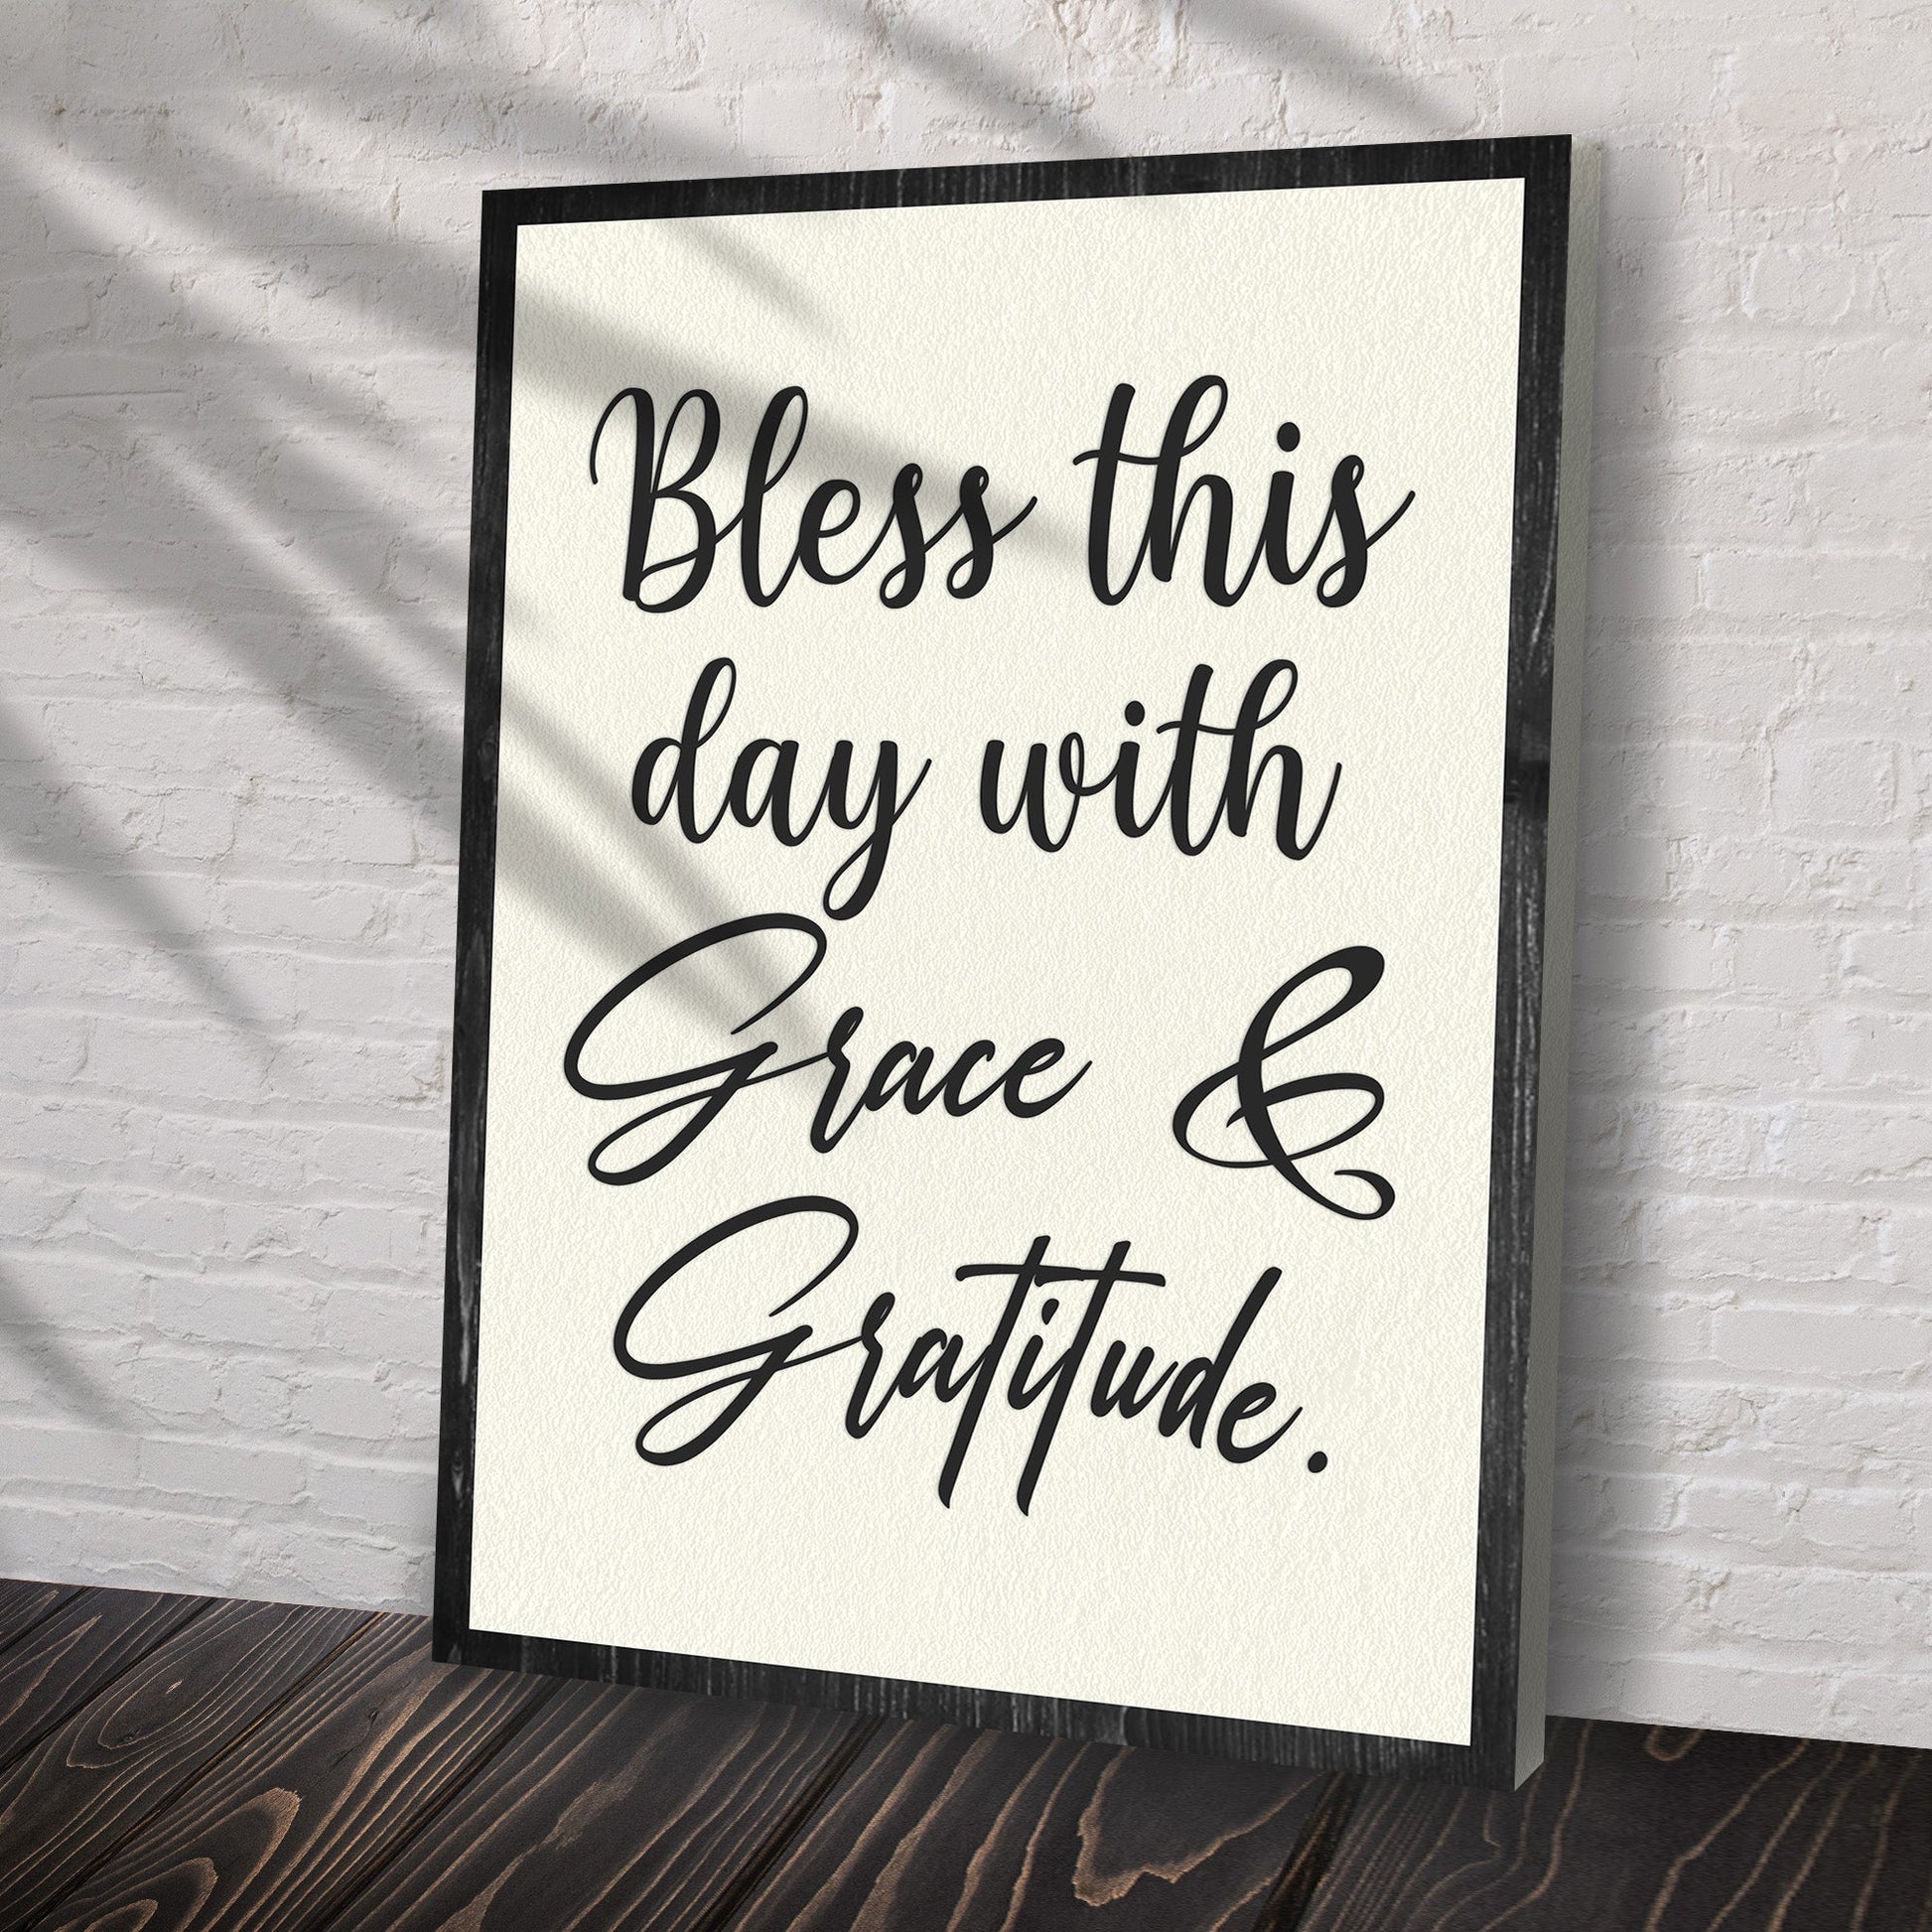 Bless This Day With Grace And Gratitude Canvas Wall Art - Christian Wall Decor - Bible Verse Canvas Art